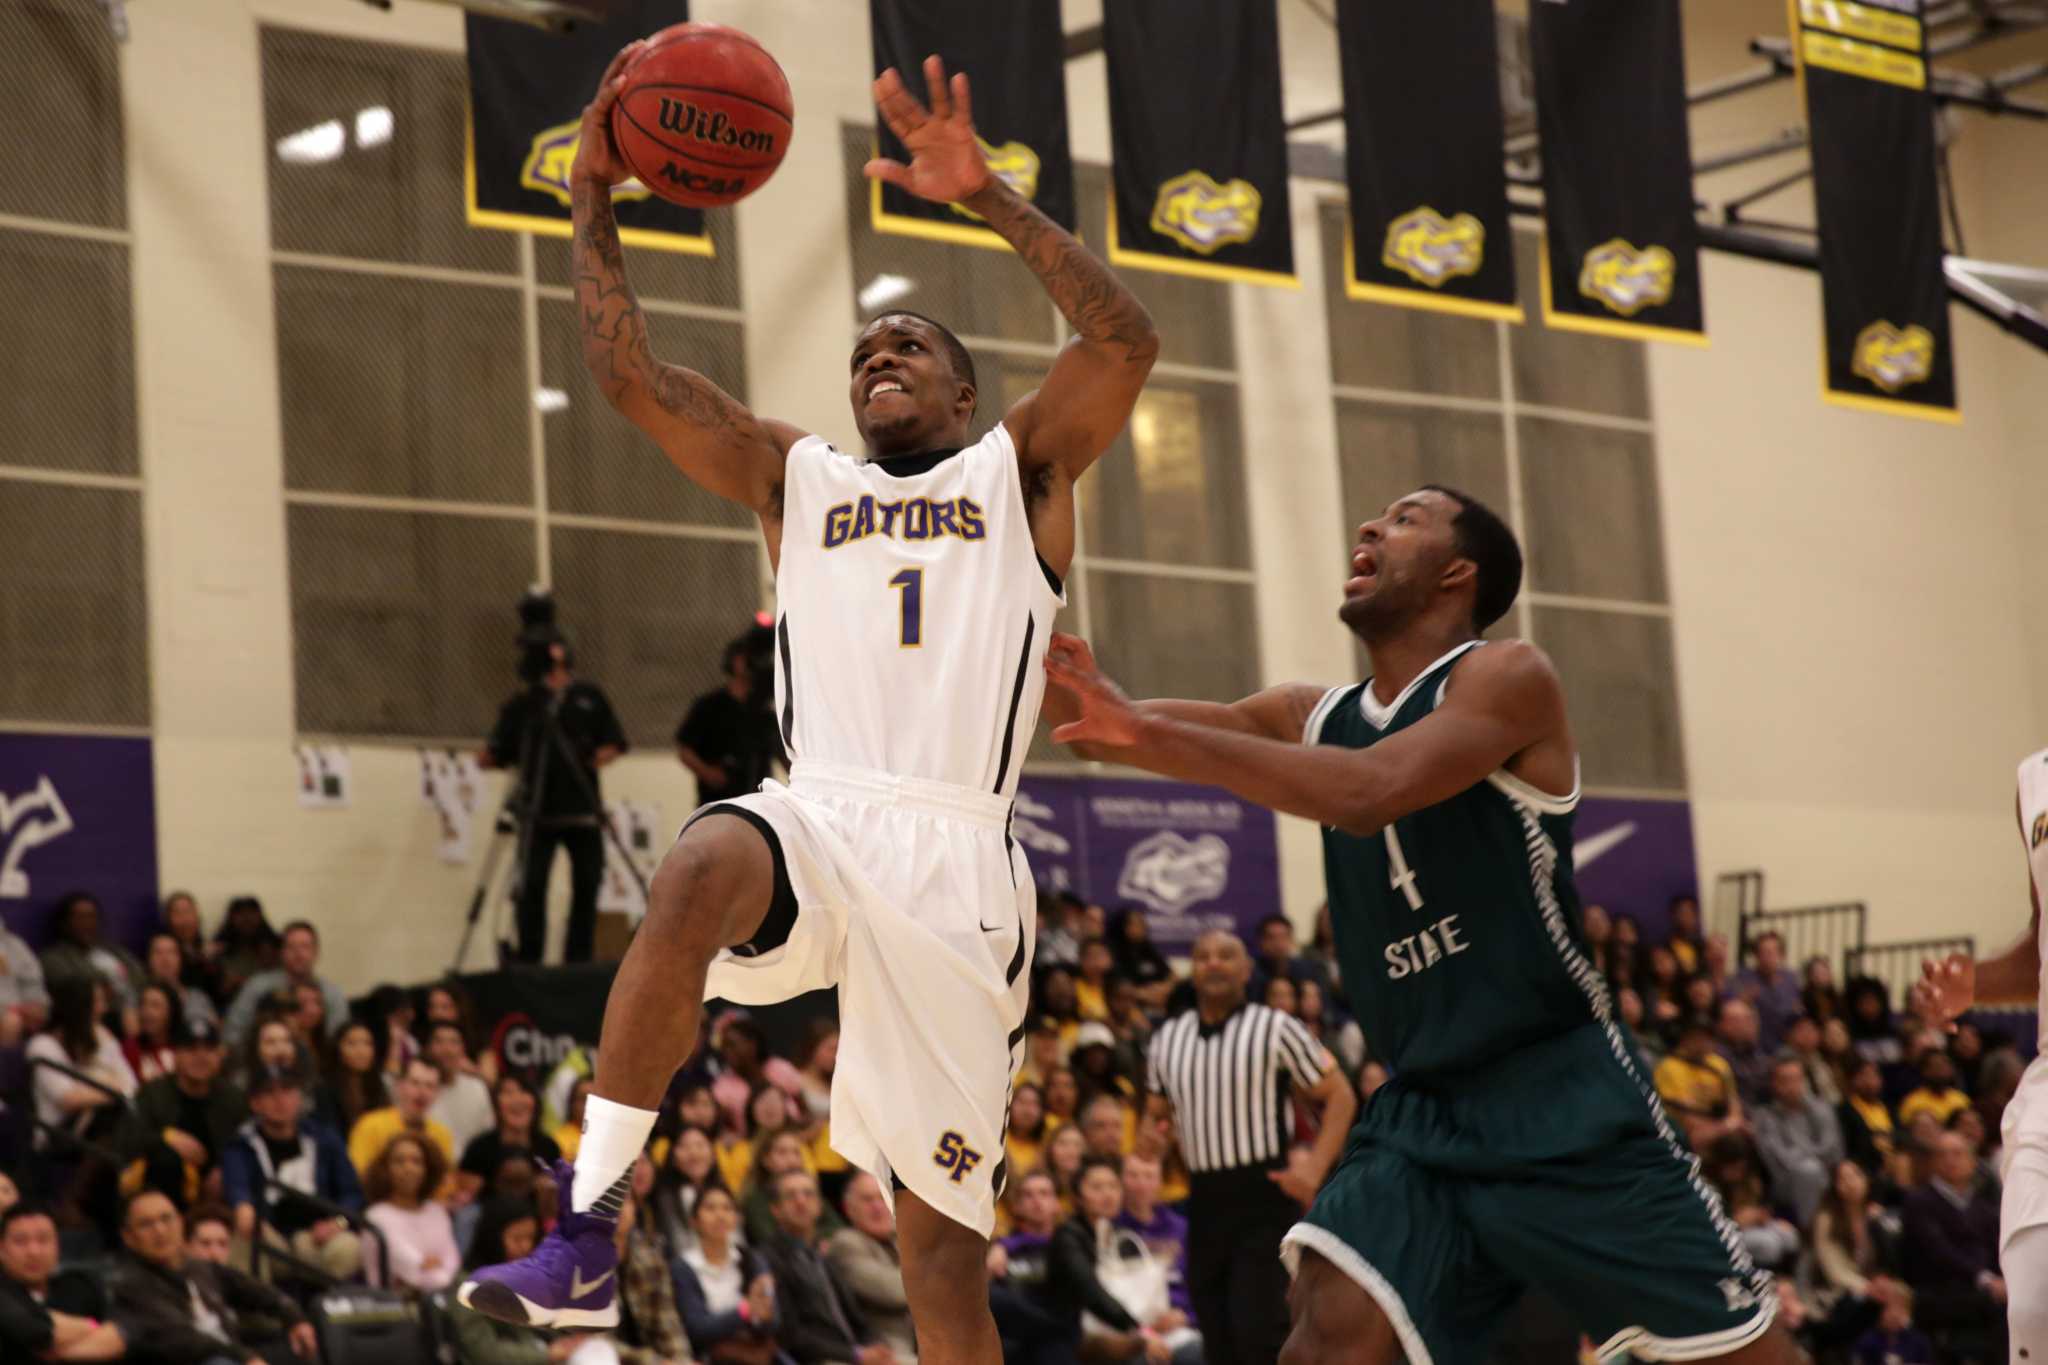 SF State Gators’ guard Warren Jackson (1) makes a charge towards the basket in the first half of a game against the Humboldt State Lumberjacks at The Swamp at SF State on Friday, Feb. 5, 2016. The Gators won 85-59.( Ryan McNulty / Xpress )